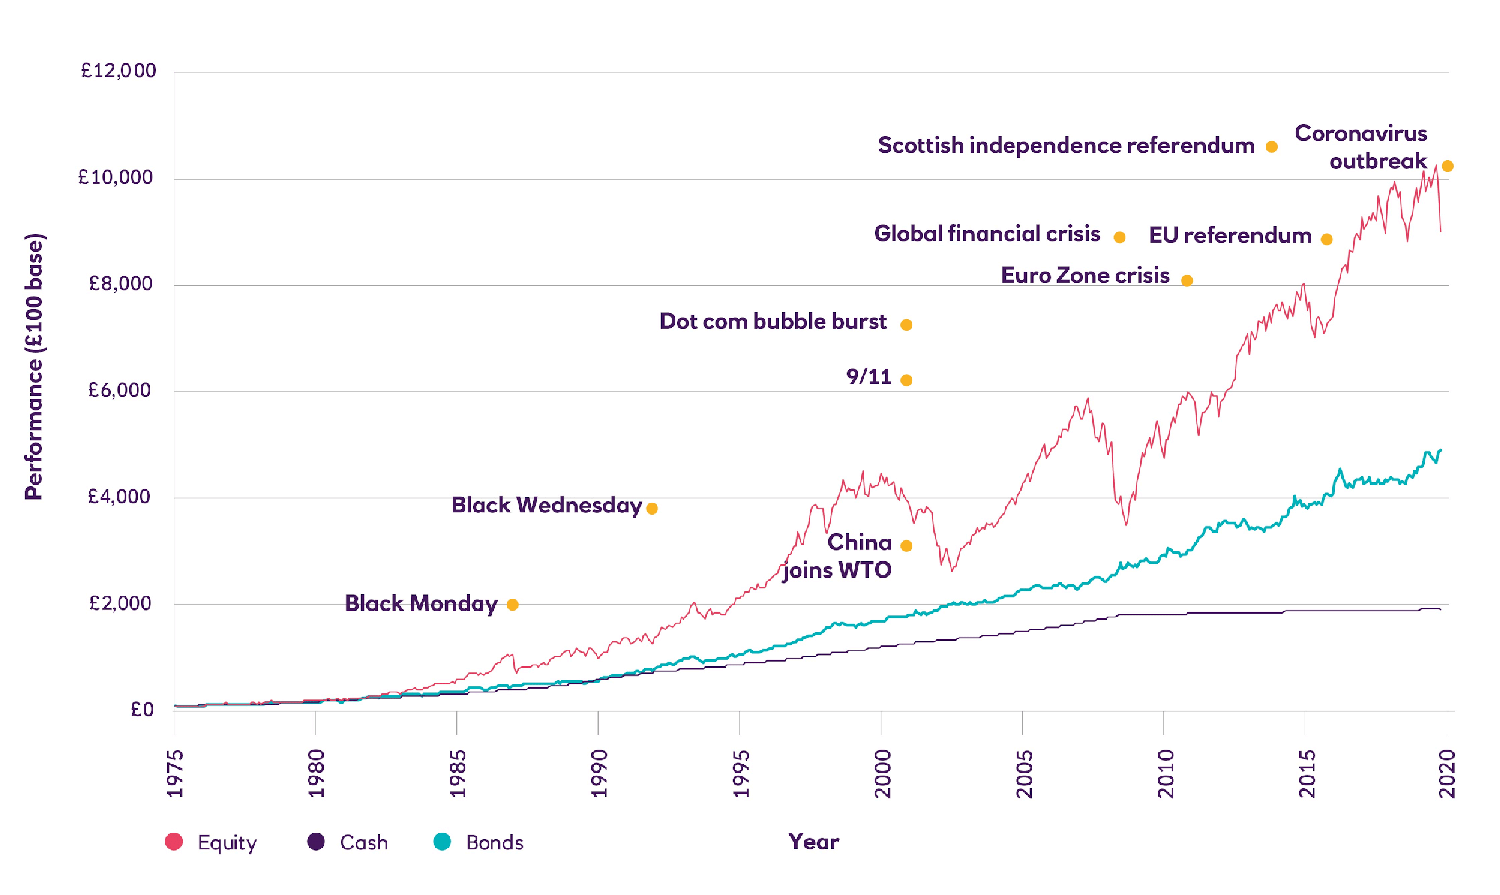 Chart showing the ups and downs of the share market over the long term between 1975 and 2020.